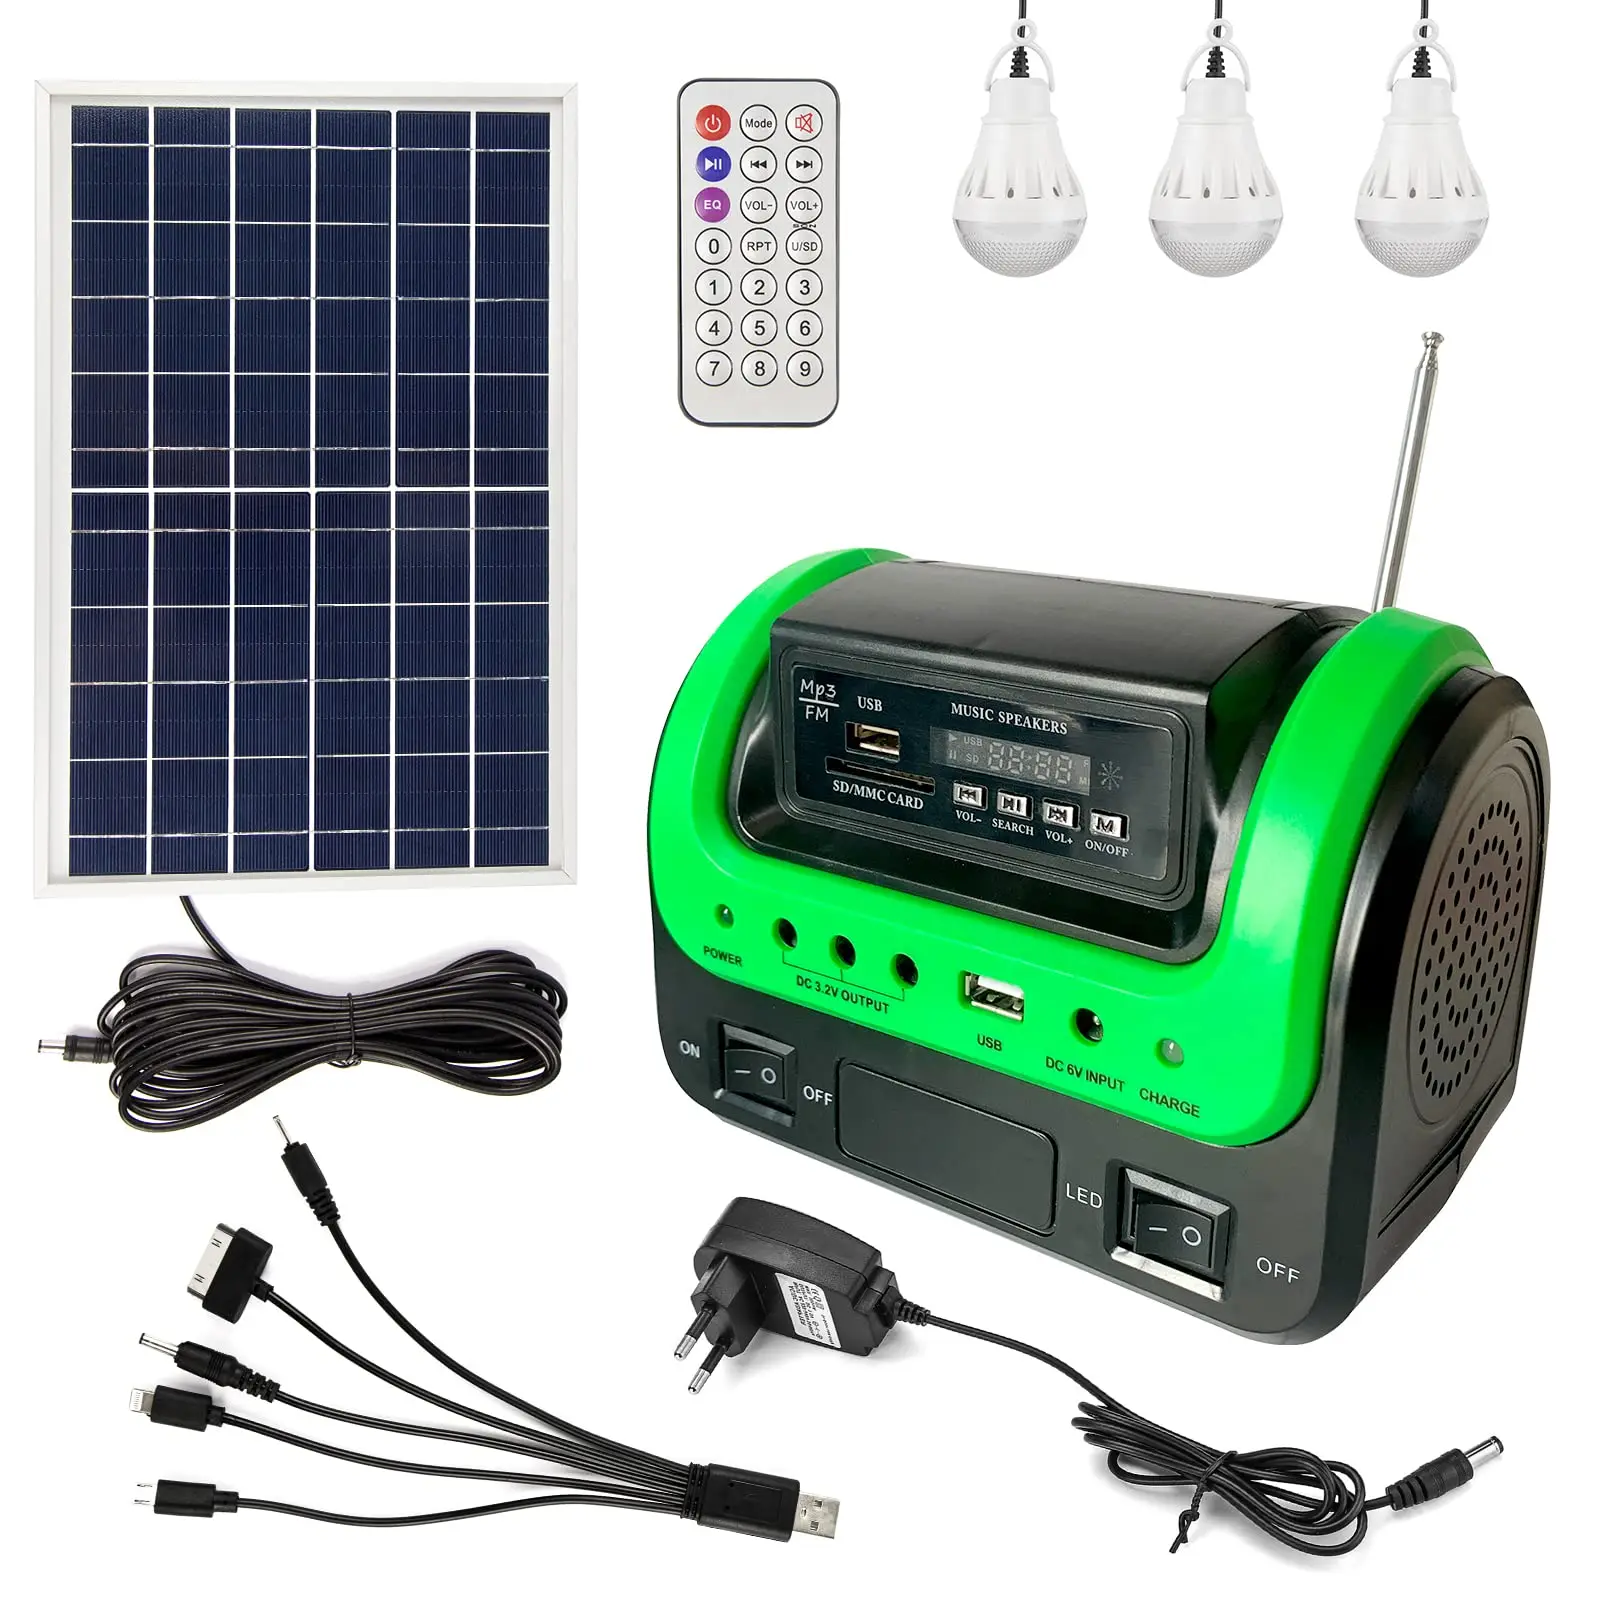 Solar Power Generator Portable Power Station with Solar Panel and Flashlight Solar Powered for Home Use Camping Travel Emergency